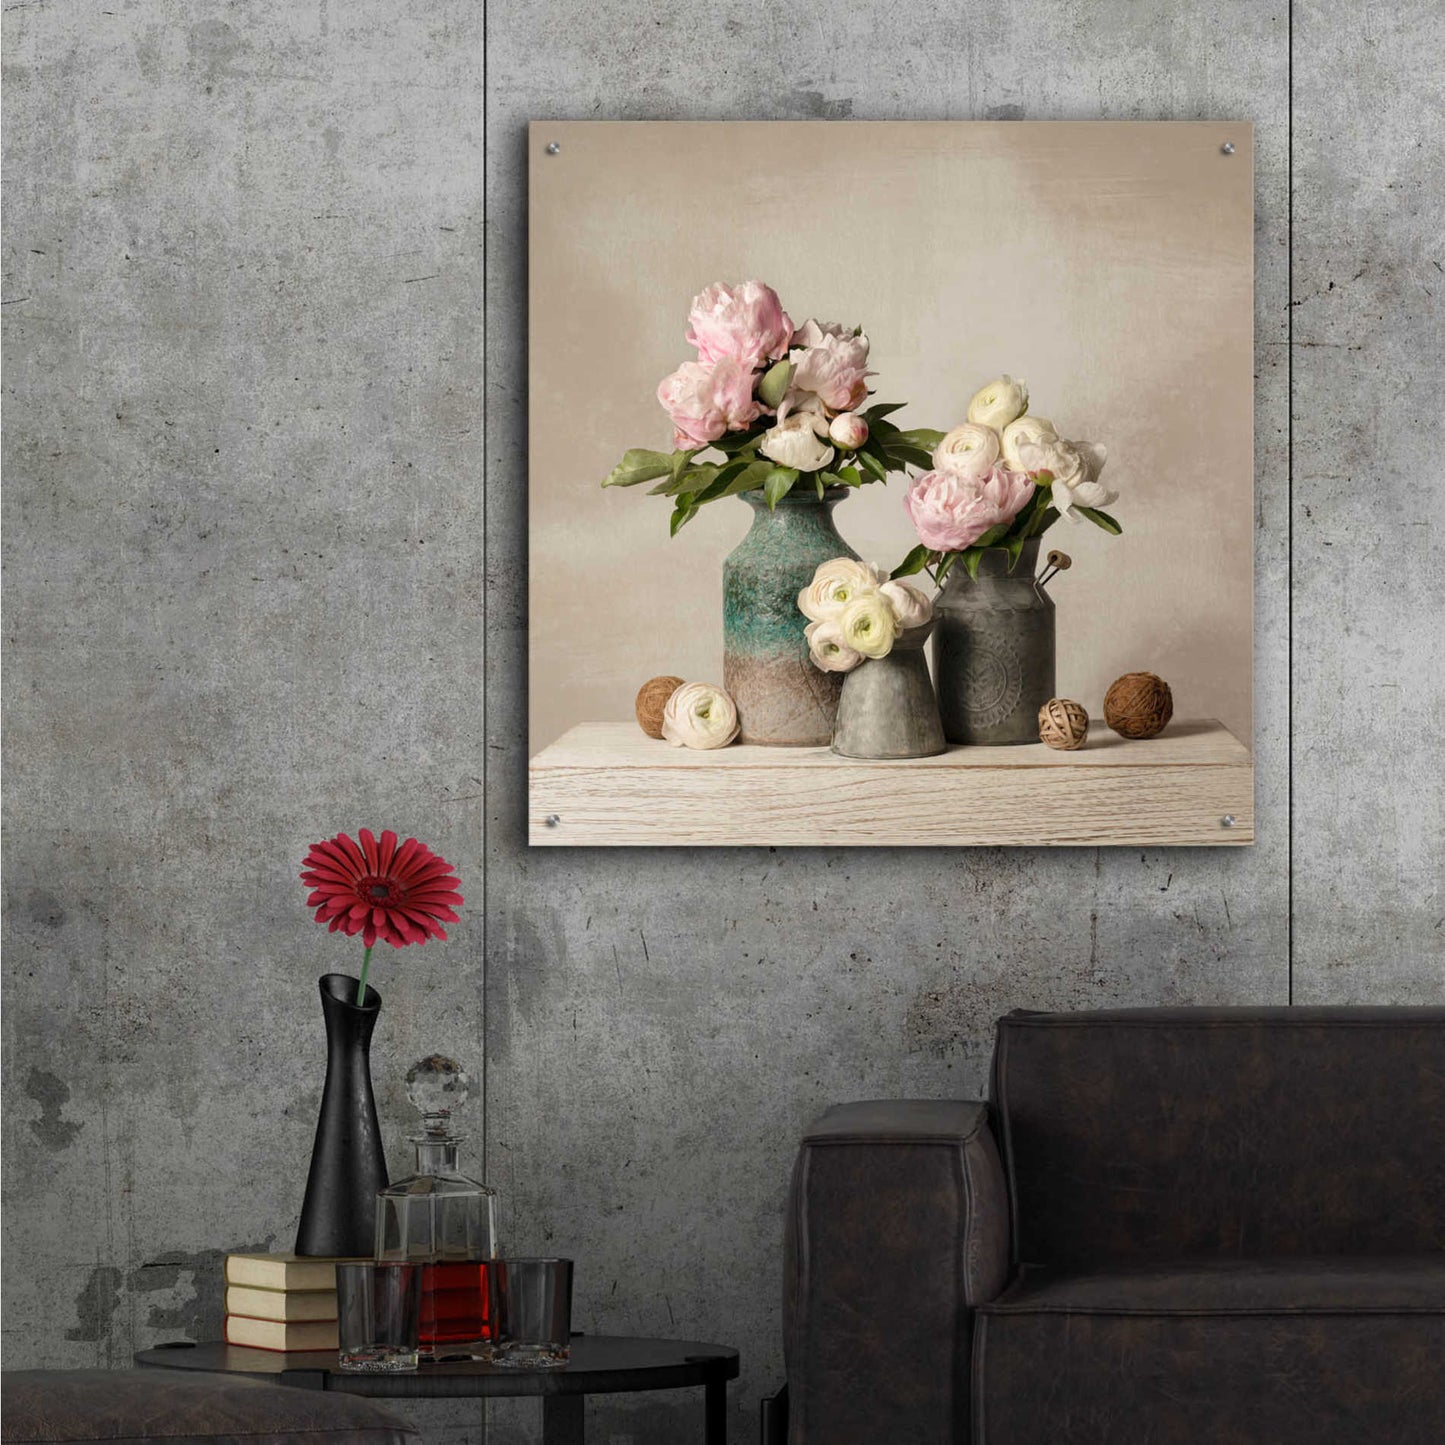 Epic Art 'Three Spring Blooms' by Leah McLean Acrylic Glass Wall Art,36x36